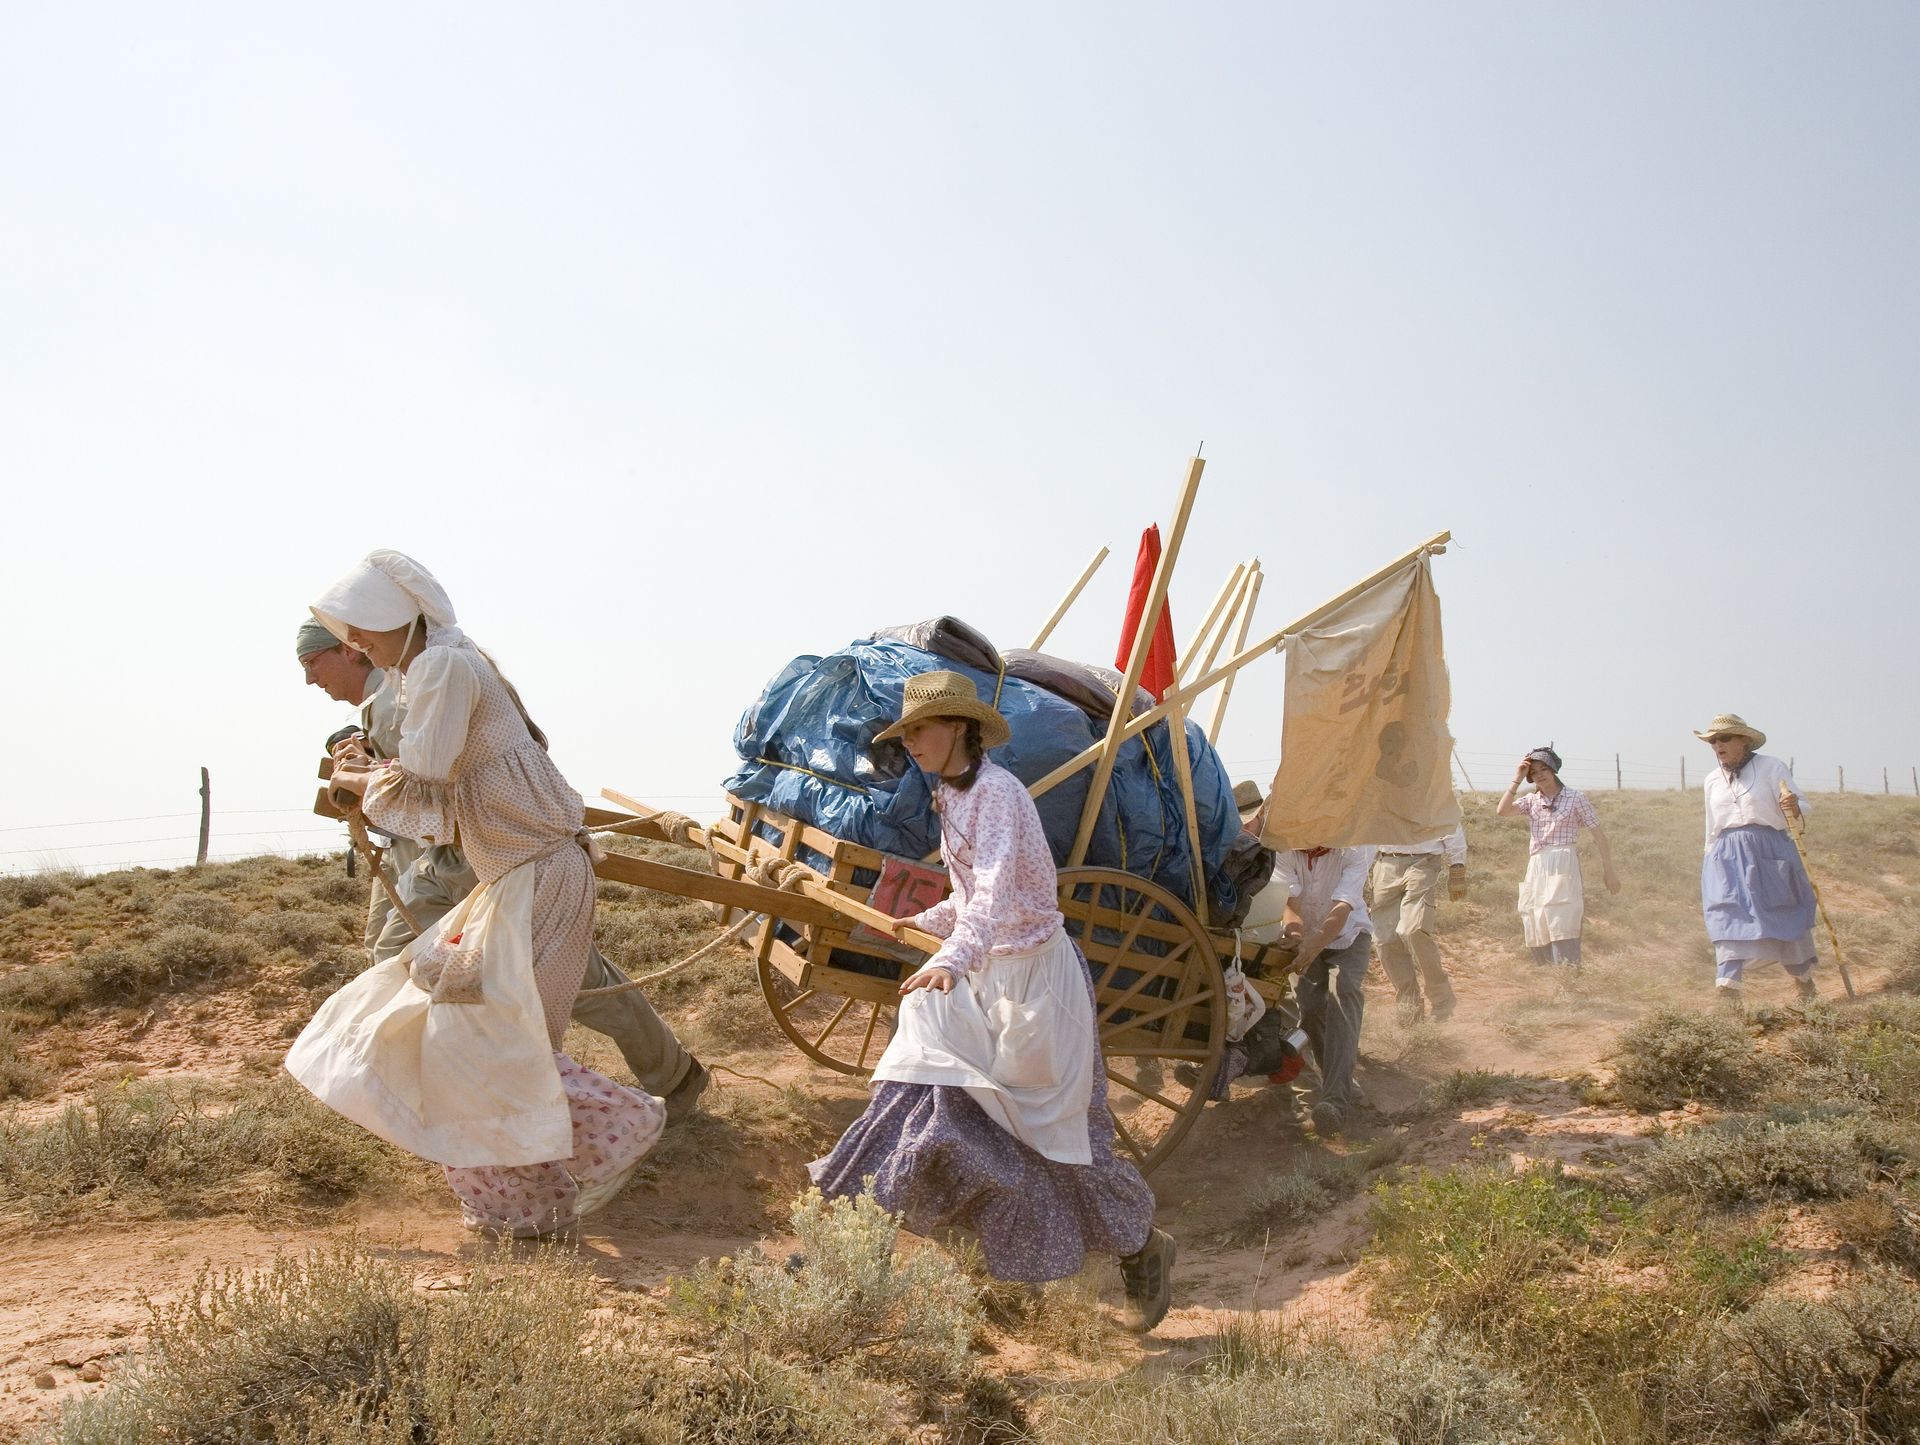 A group of women dressed as pioneers pull a handcart together over a rocky path.